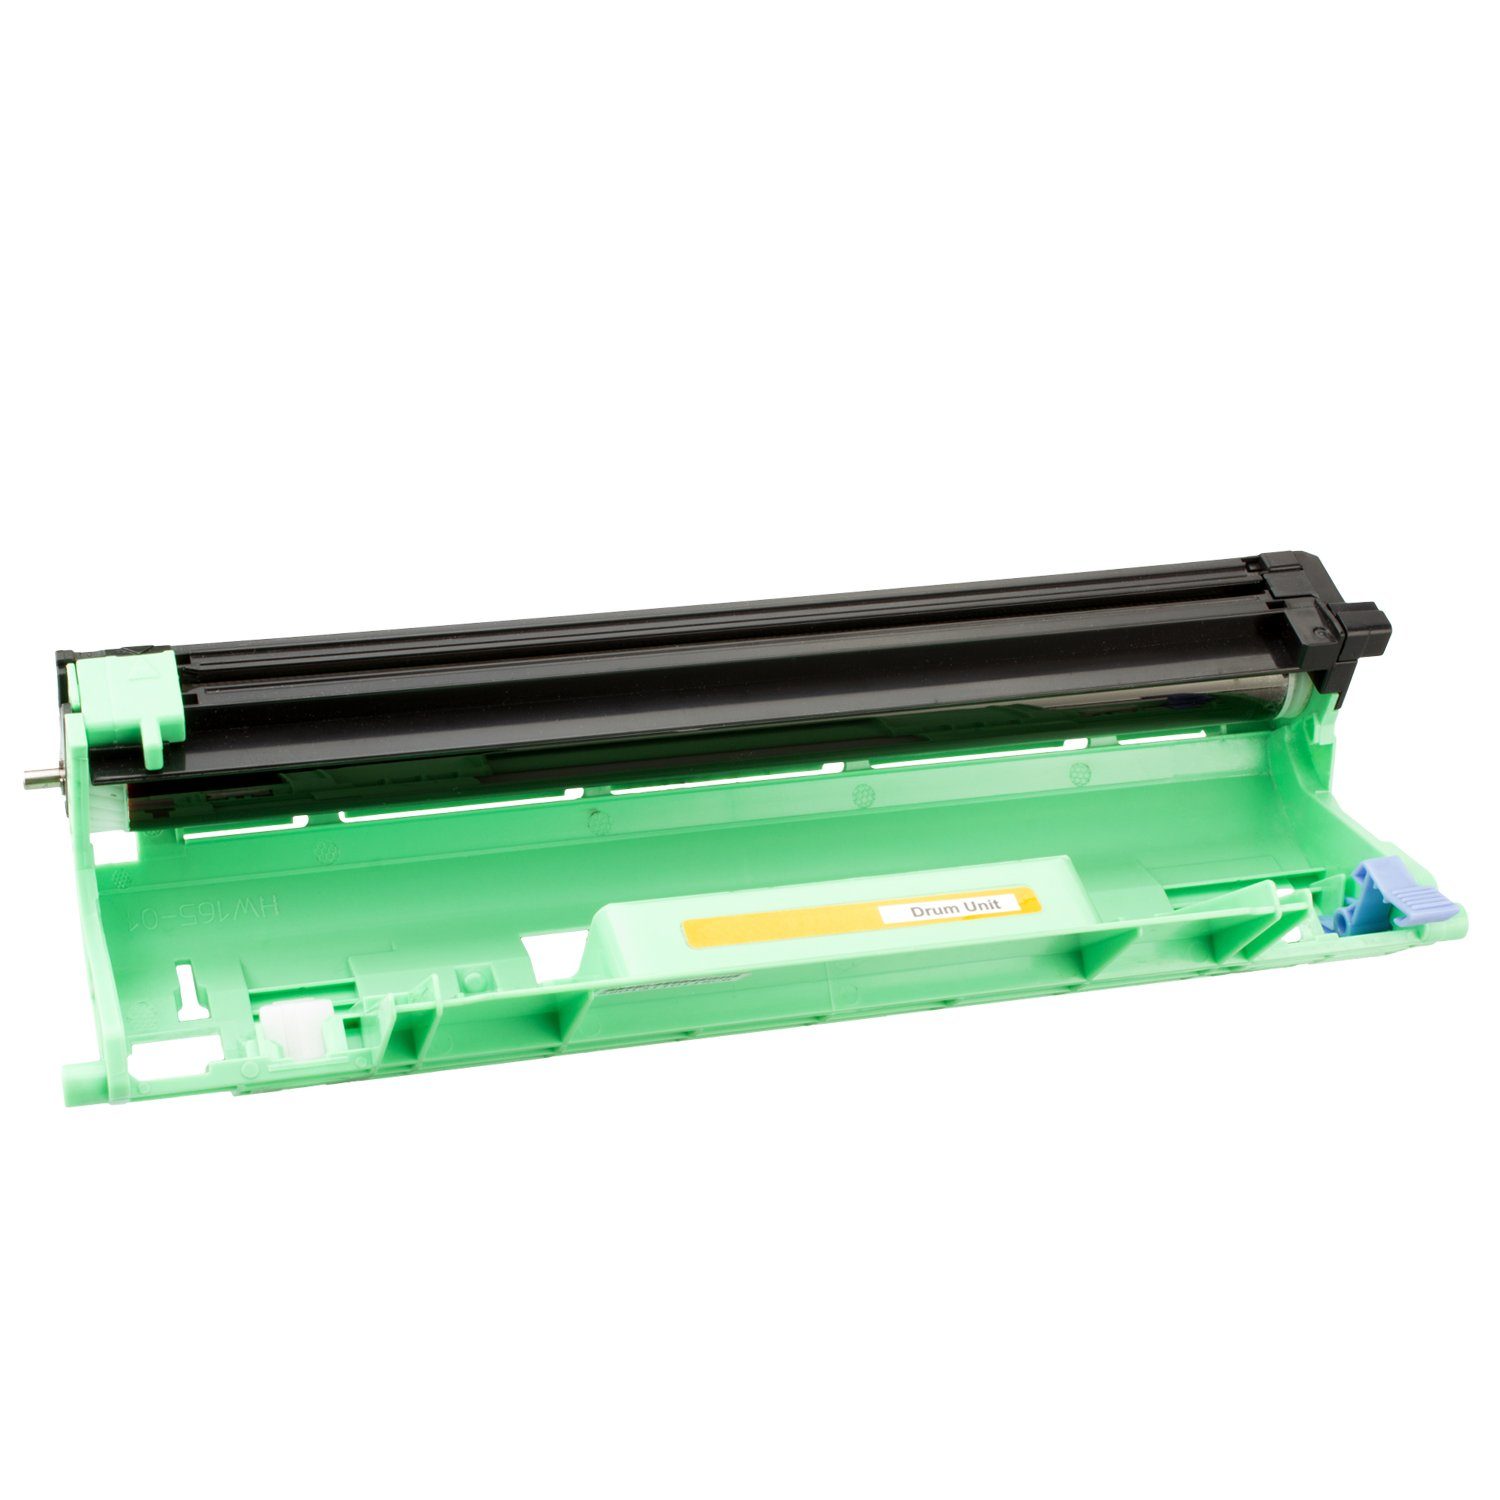 DR 1050 Trommel), DCP-1512 für DCP-1610W DR-1050 MFC-1810 BrotherDR1050, Brother DCP-1612W HL-1110 Tonerpatrone MFC-1910W DCP-1510 Trommel (1x Brother ersetzt Tito-Express